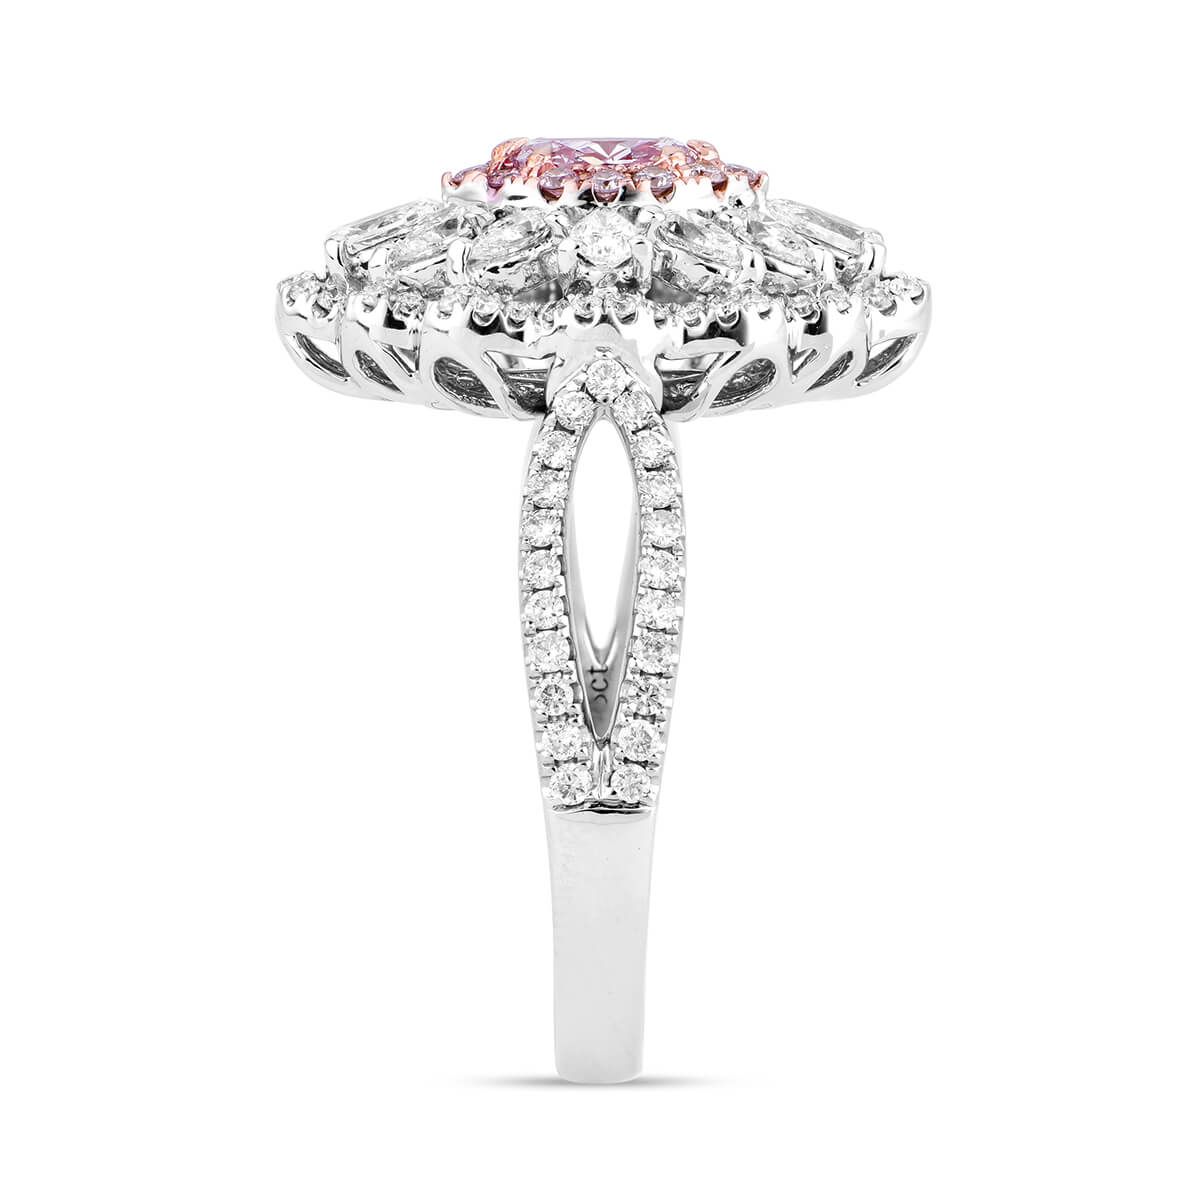 Light Pink Diamond Ring, 0.17 Ct. (1.15 Ct. TW), Marquise shape, GIA Certified, 5192255856